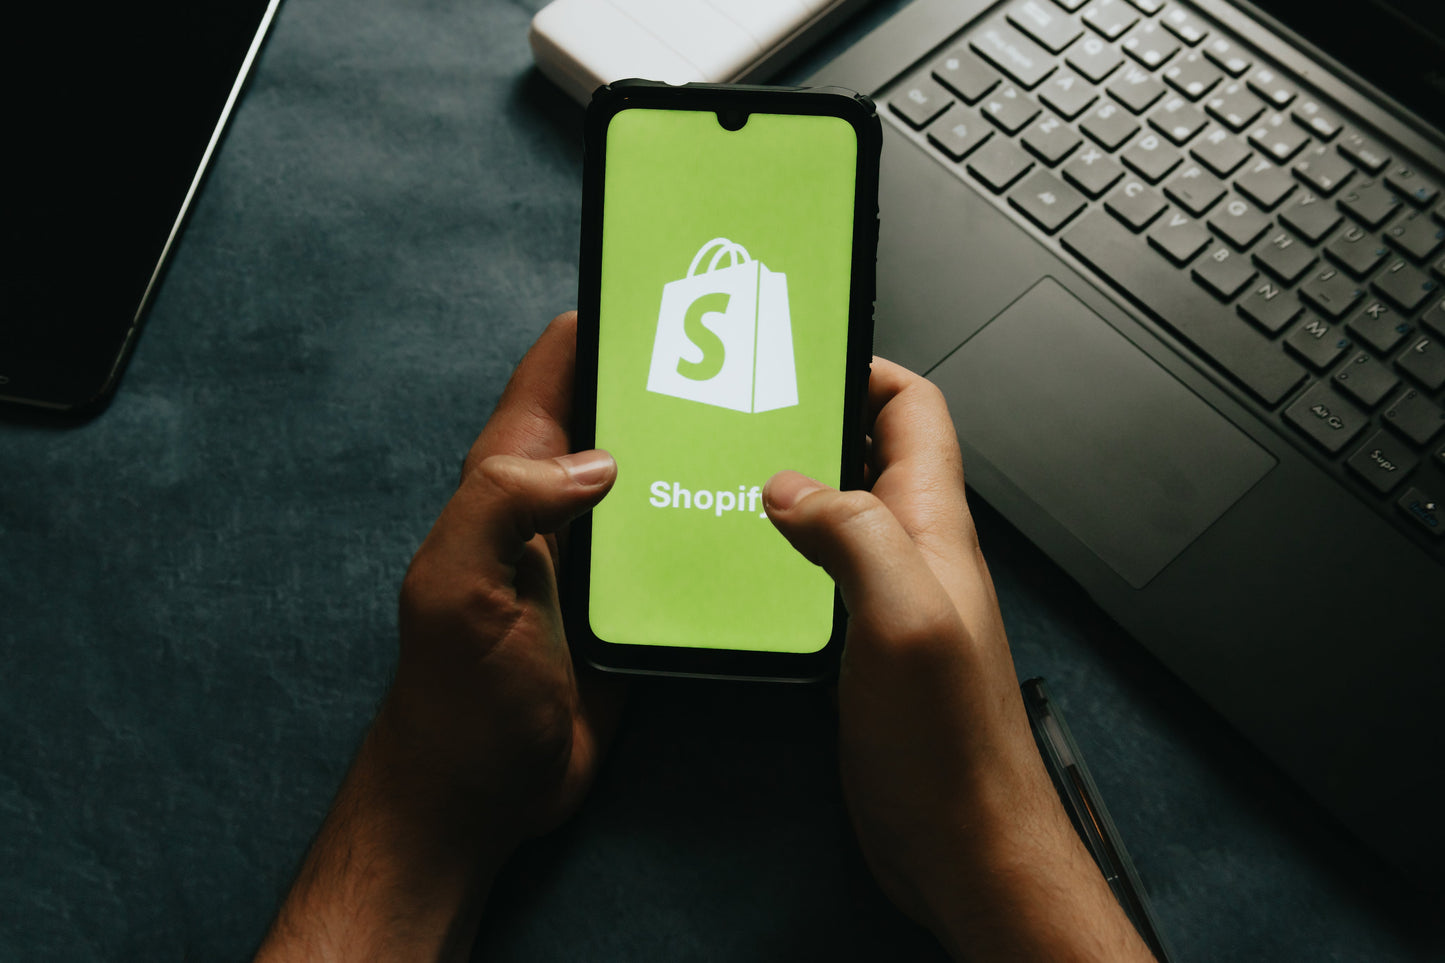 Shopify Stores Develop & Management (hourly rate)